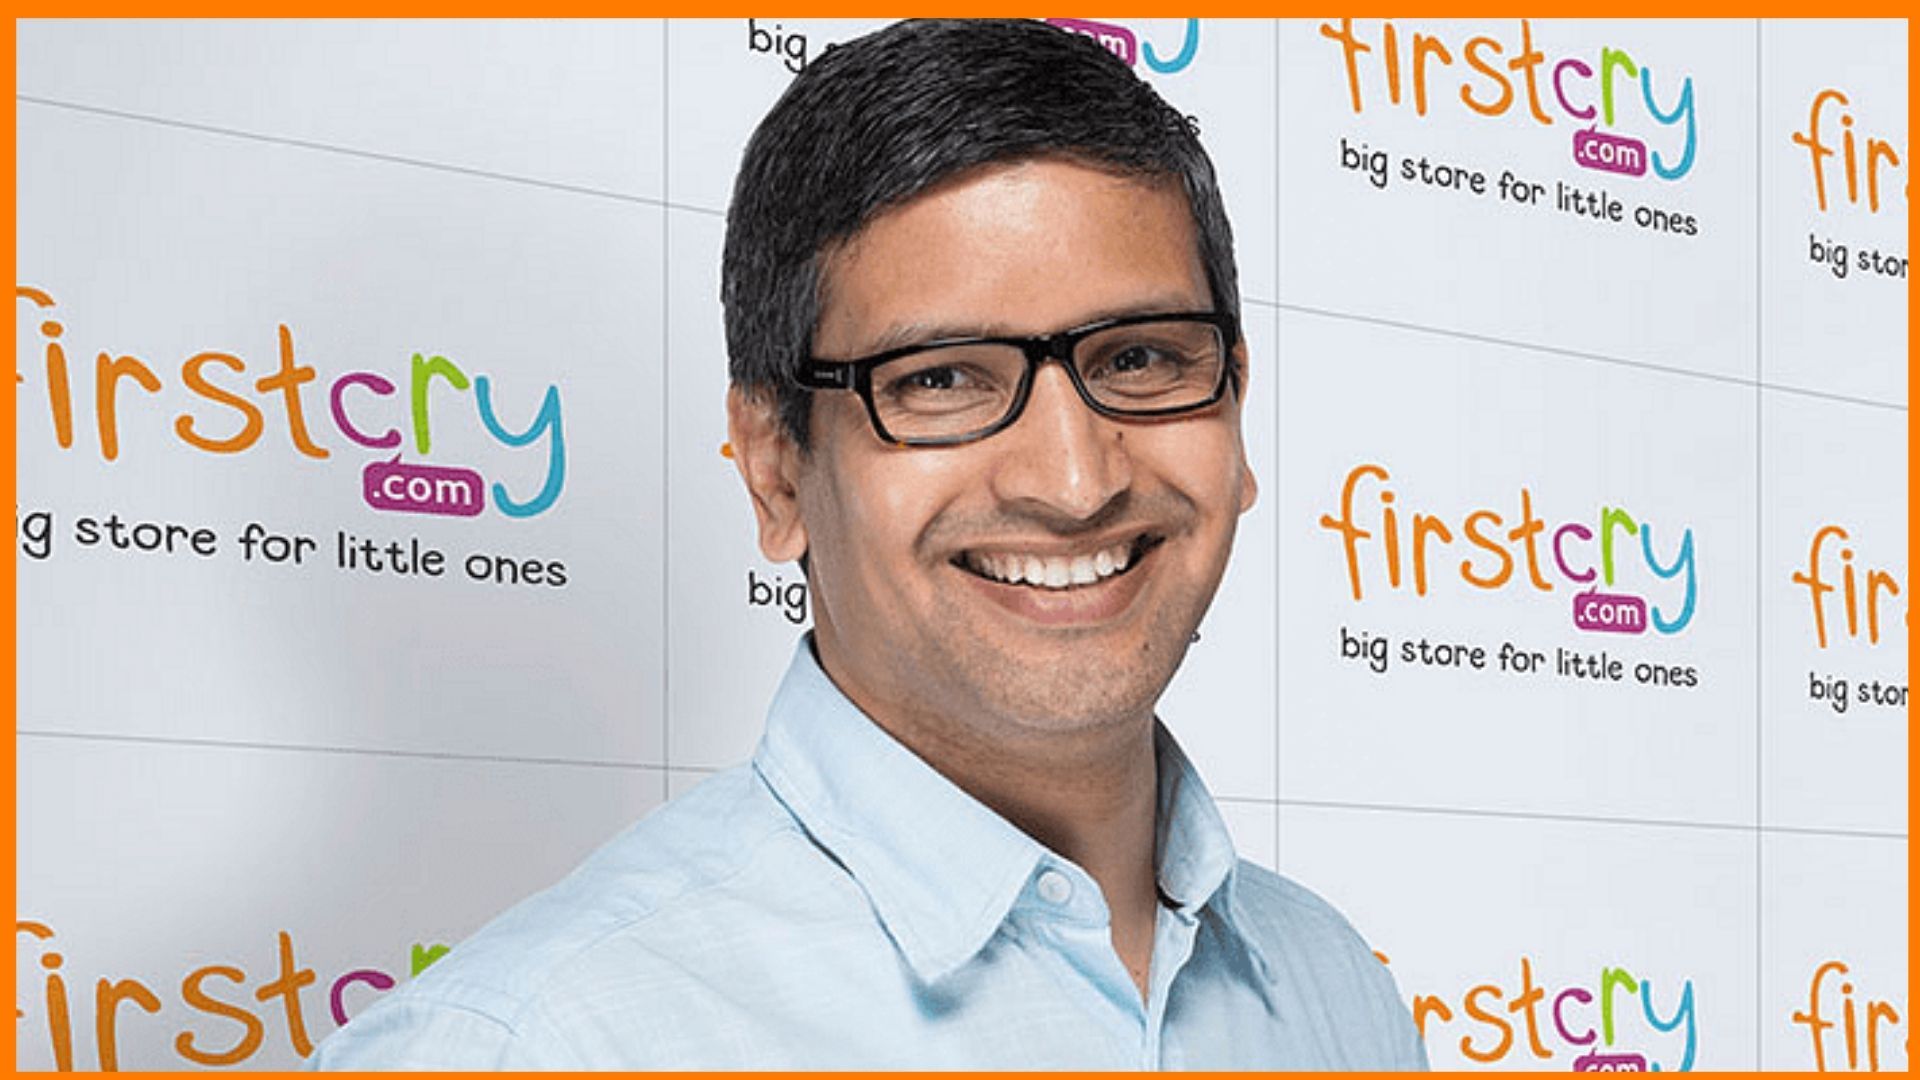 FirstCry - One Platform for A Million Baby Care Products!